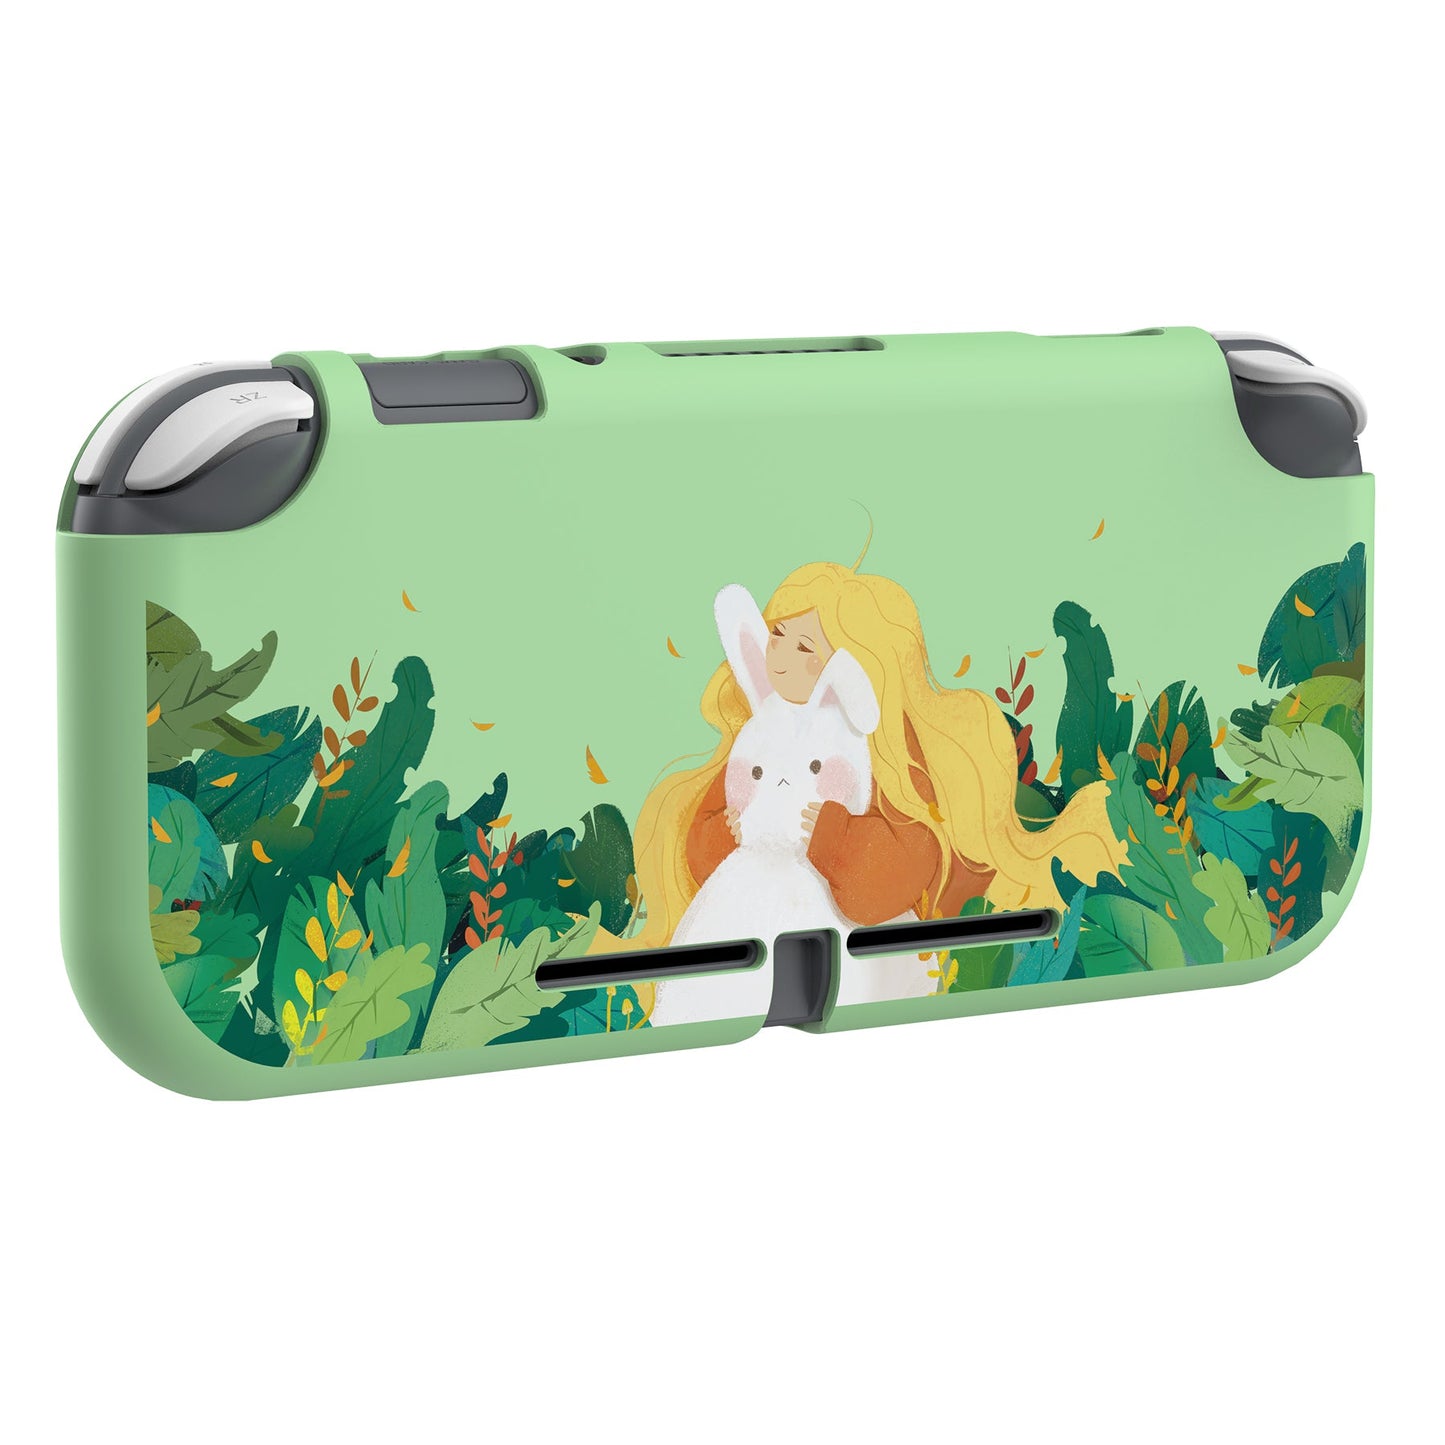 PlayVital Rabbit & Girl Custom Protective Case for NS Switch Lite, Soft TPU Slim Case Cover for NS Switch Lite - LTU6003 PlayVital